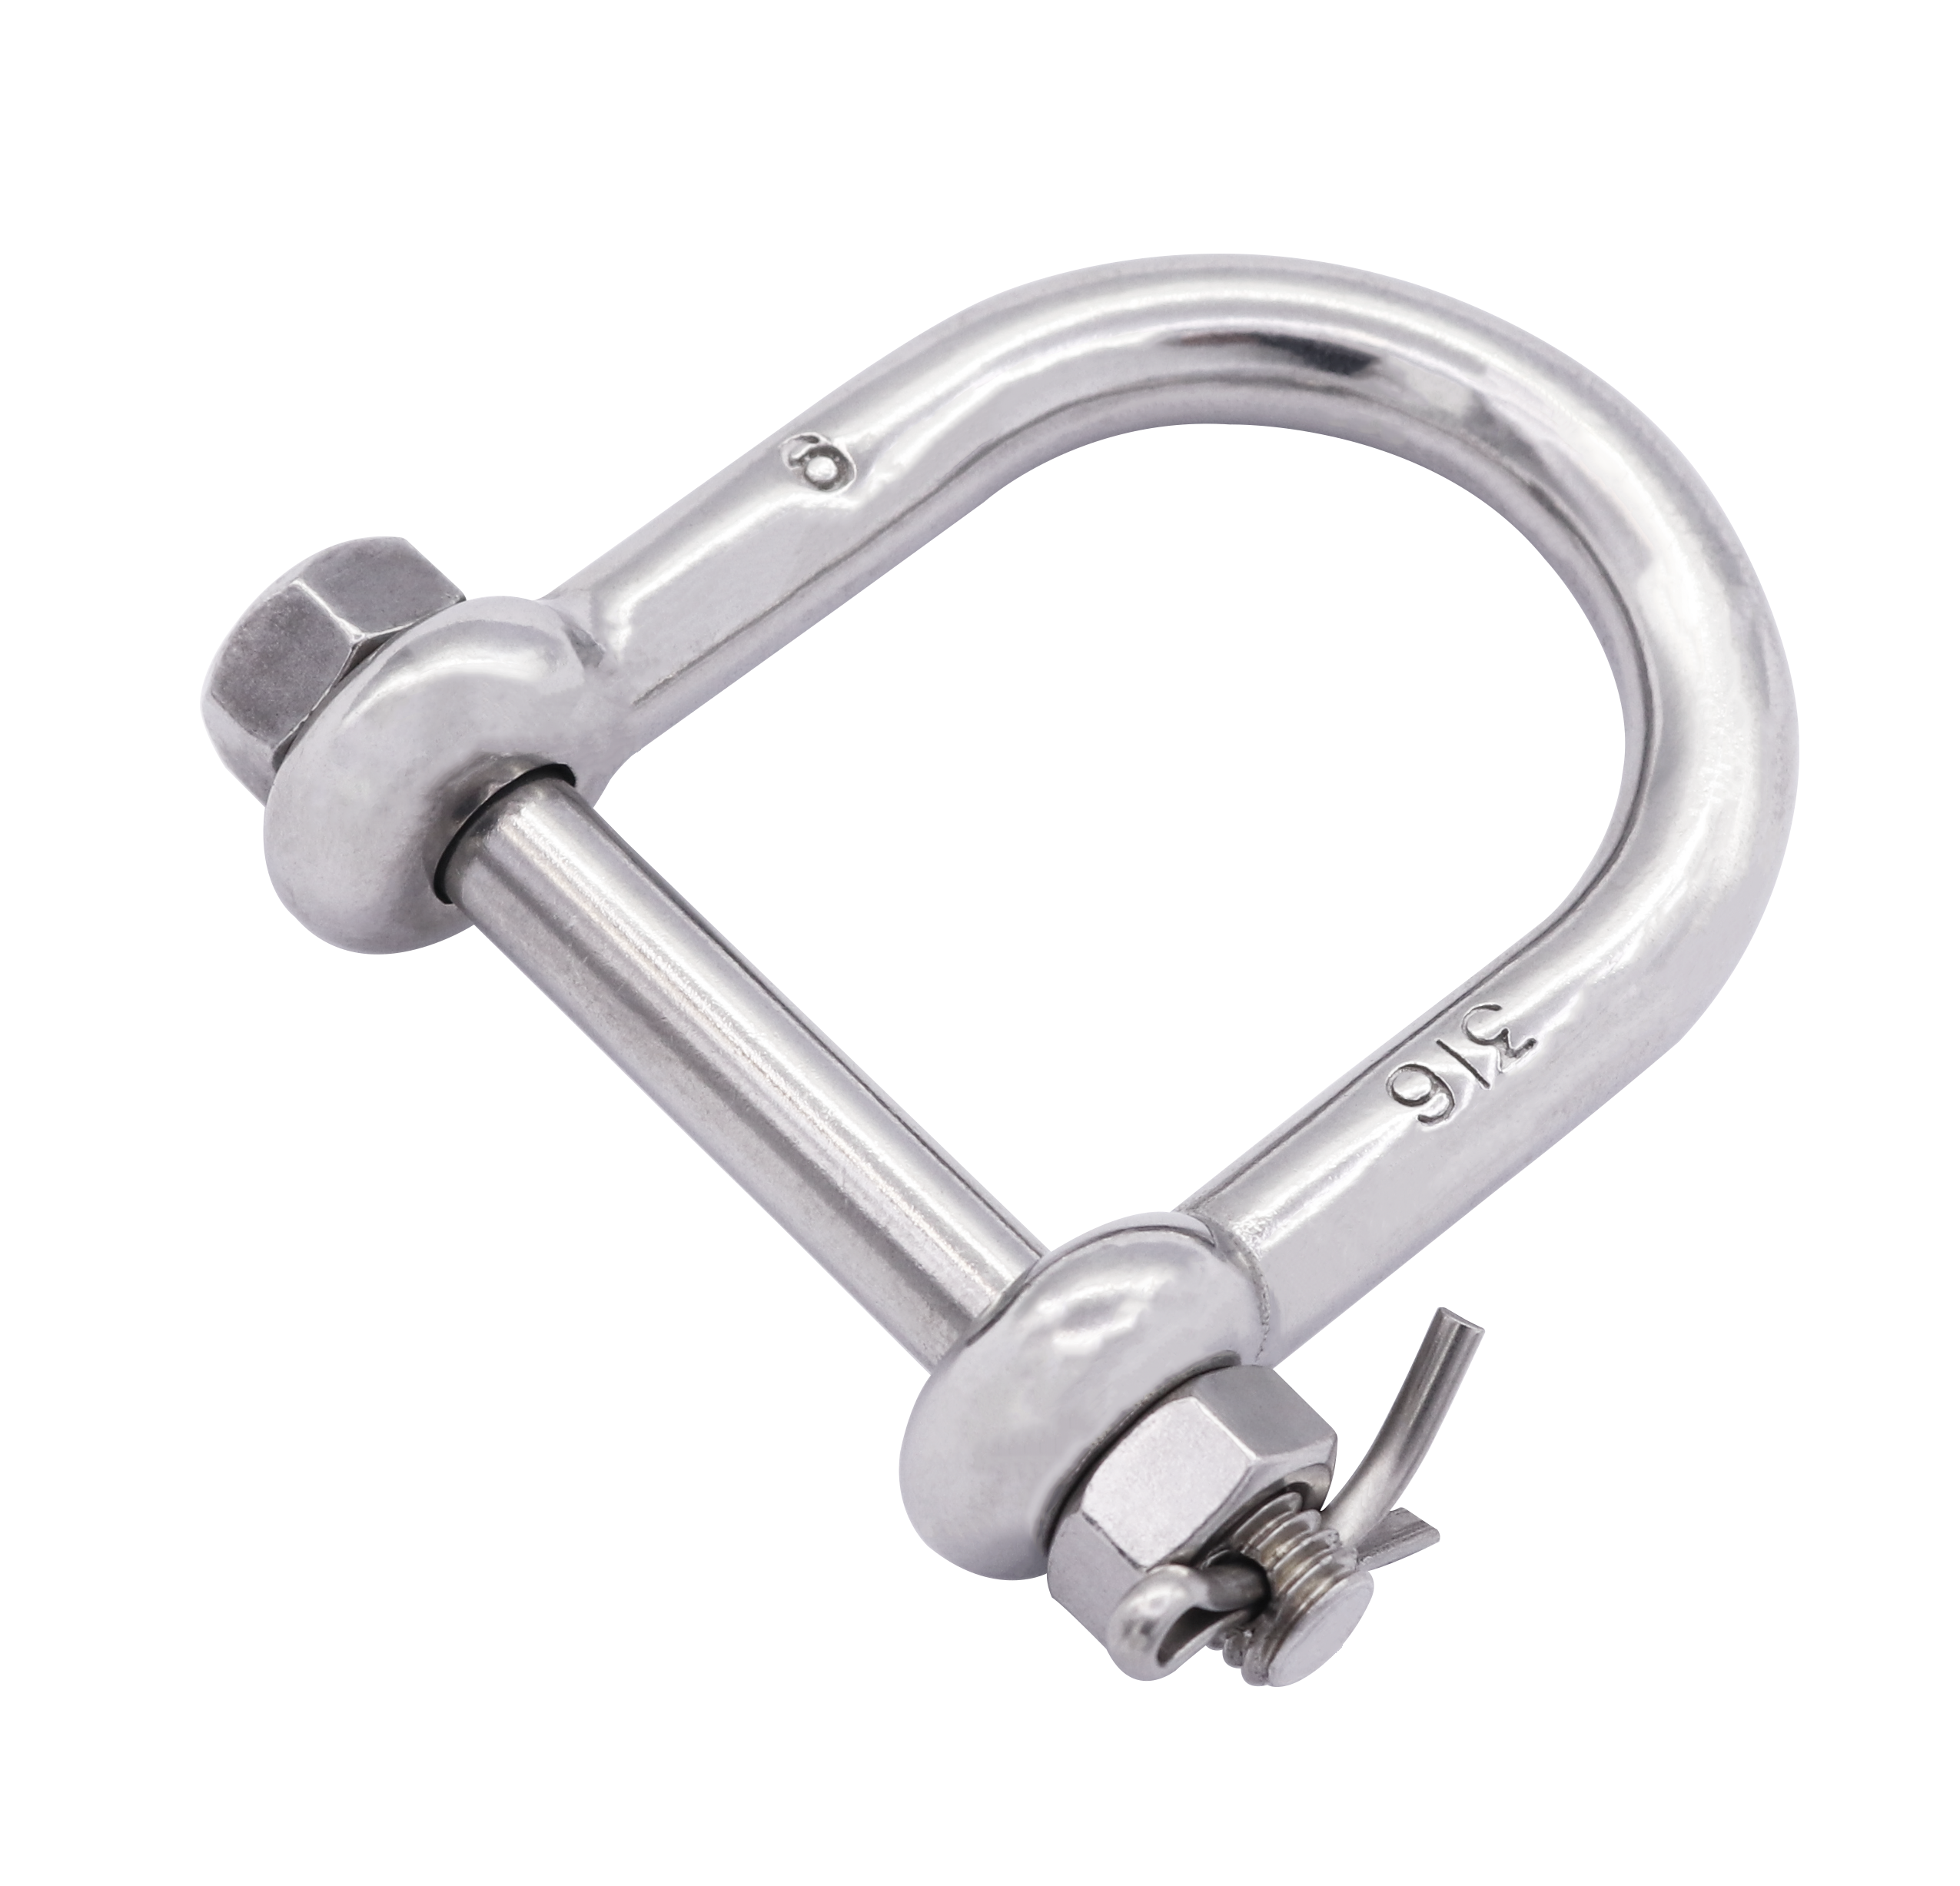 S360BWN Wide D-shackle (nut and cotter pin) - 316